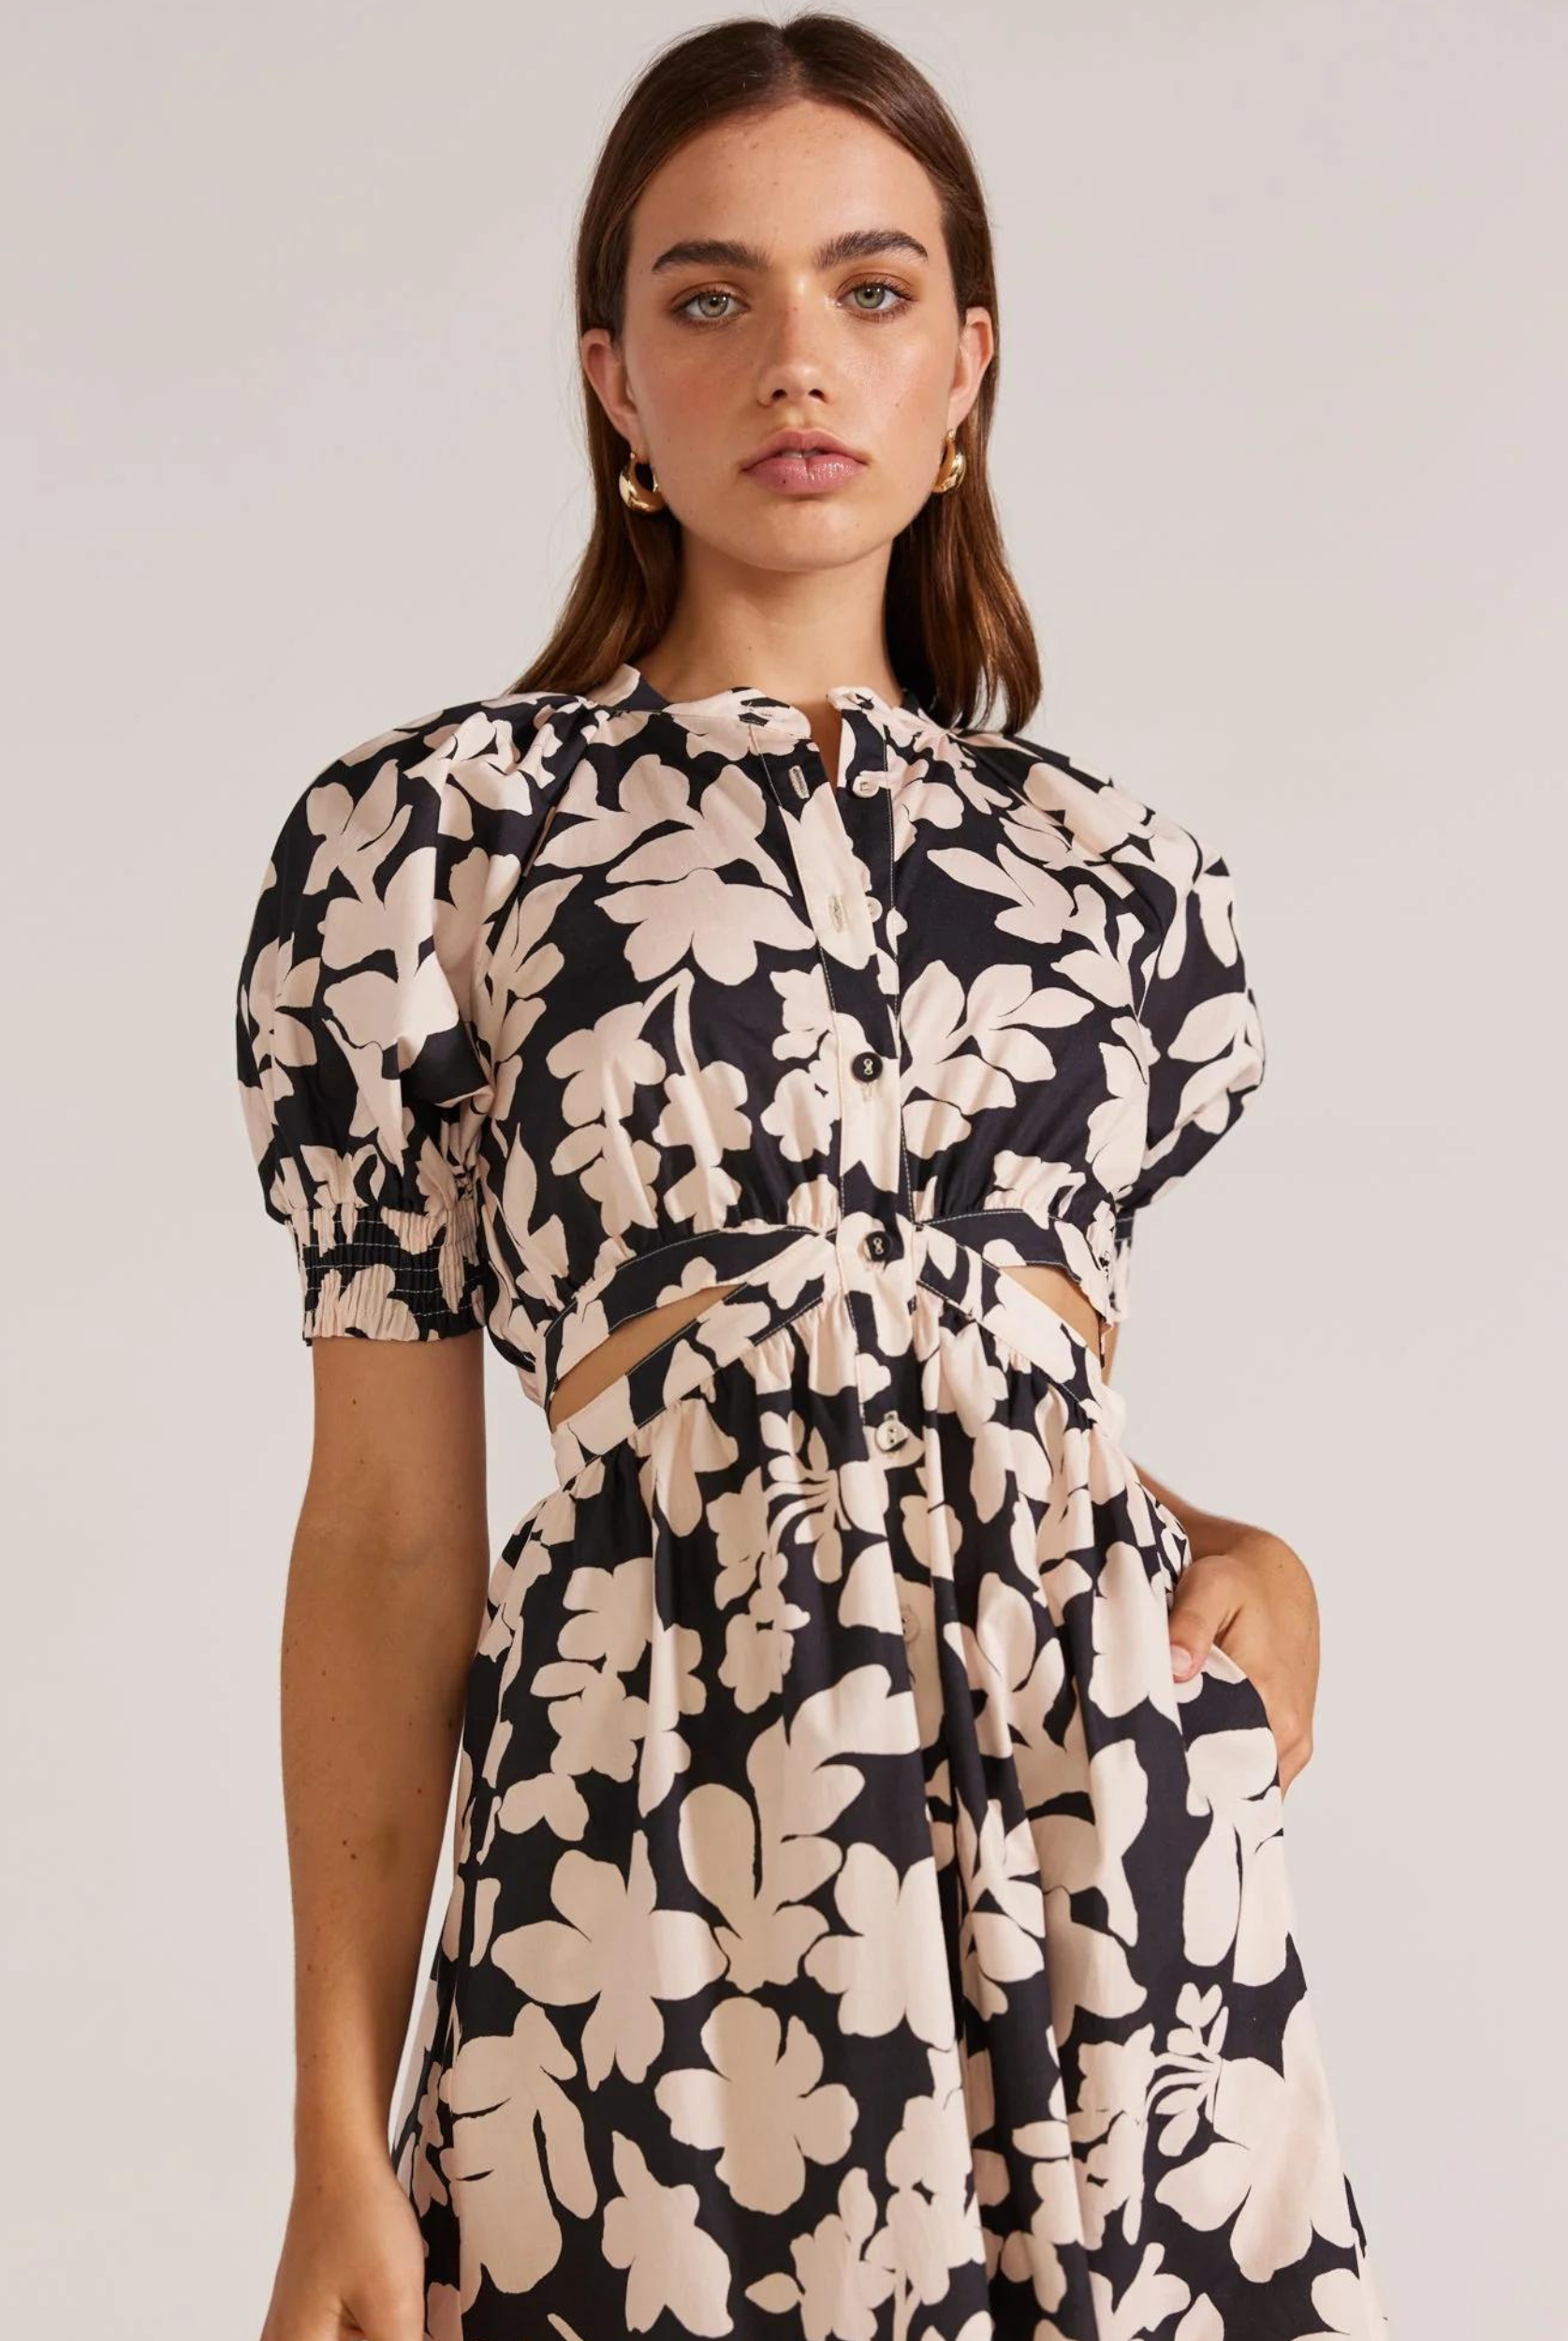 Selita Cut Out Midi Dress from Staple the Label black and white floral print with cut outs